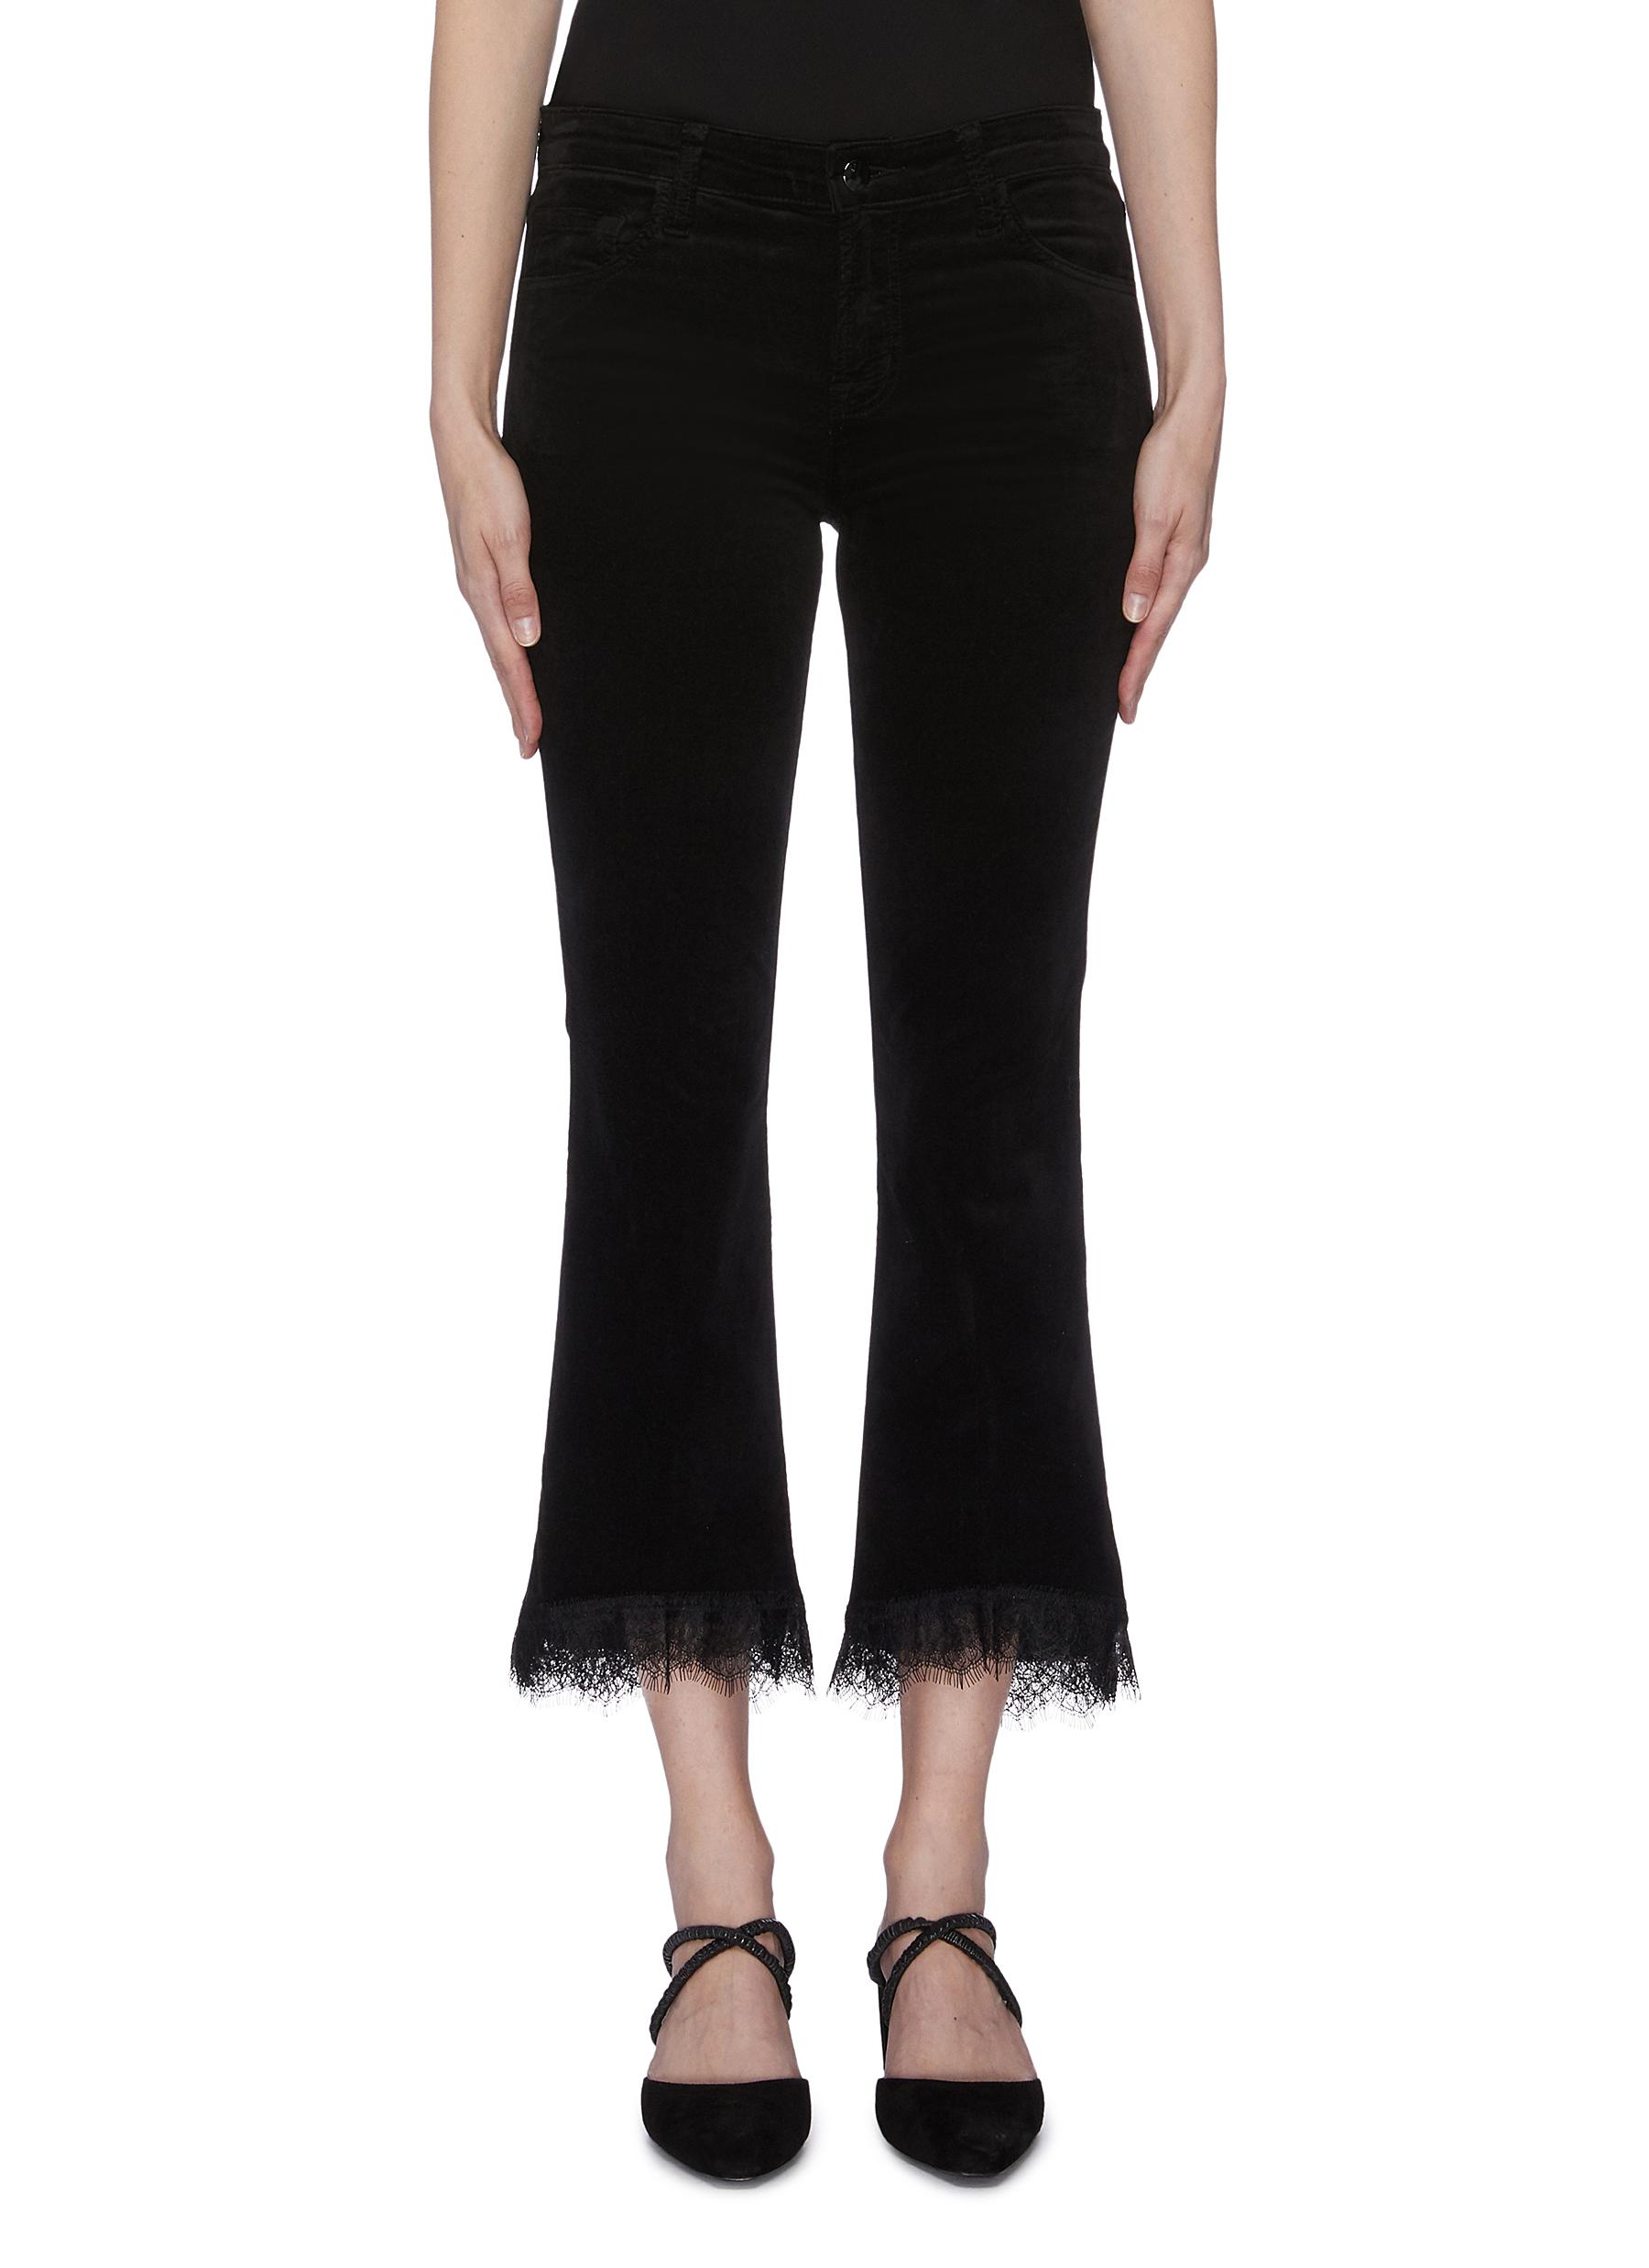 Selena lace cuff cropped flared pants by J Brand